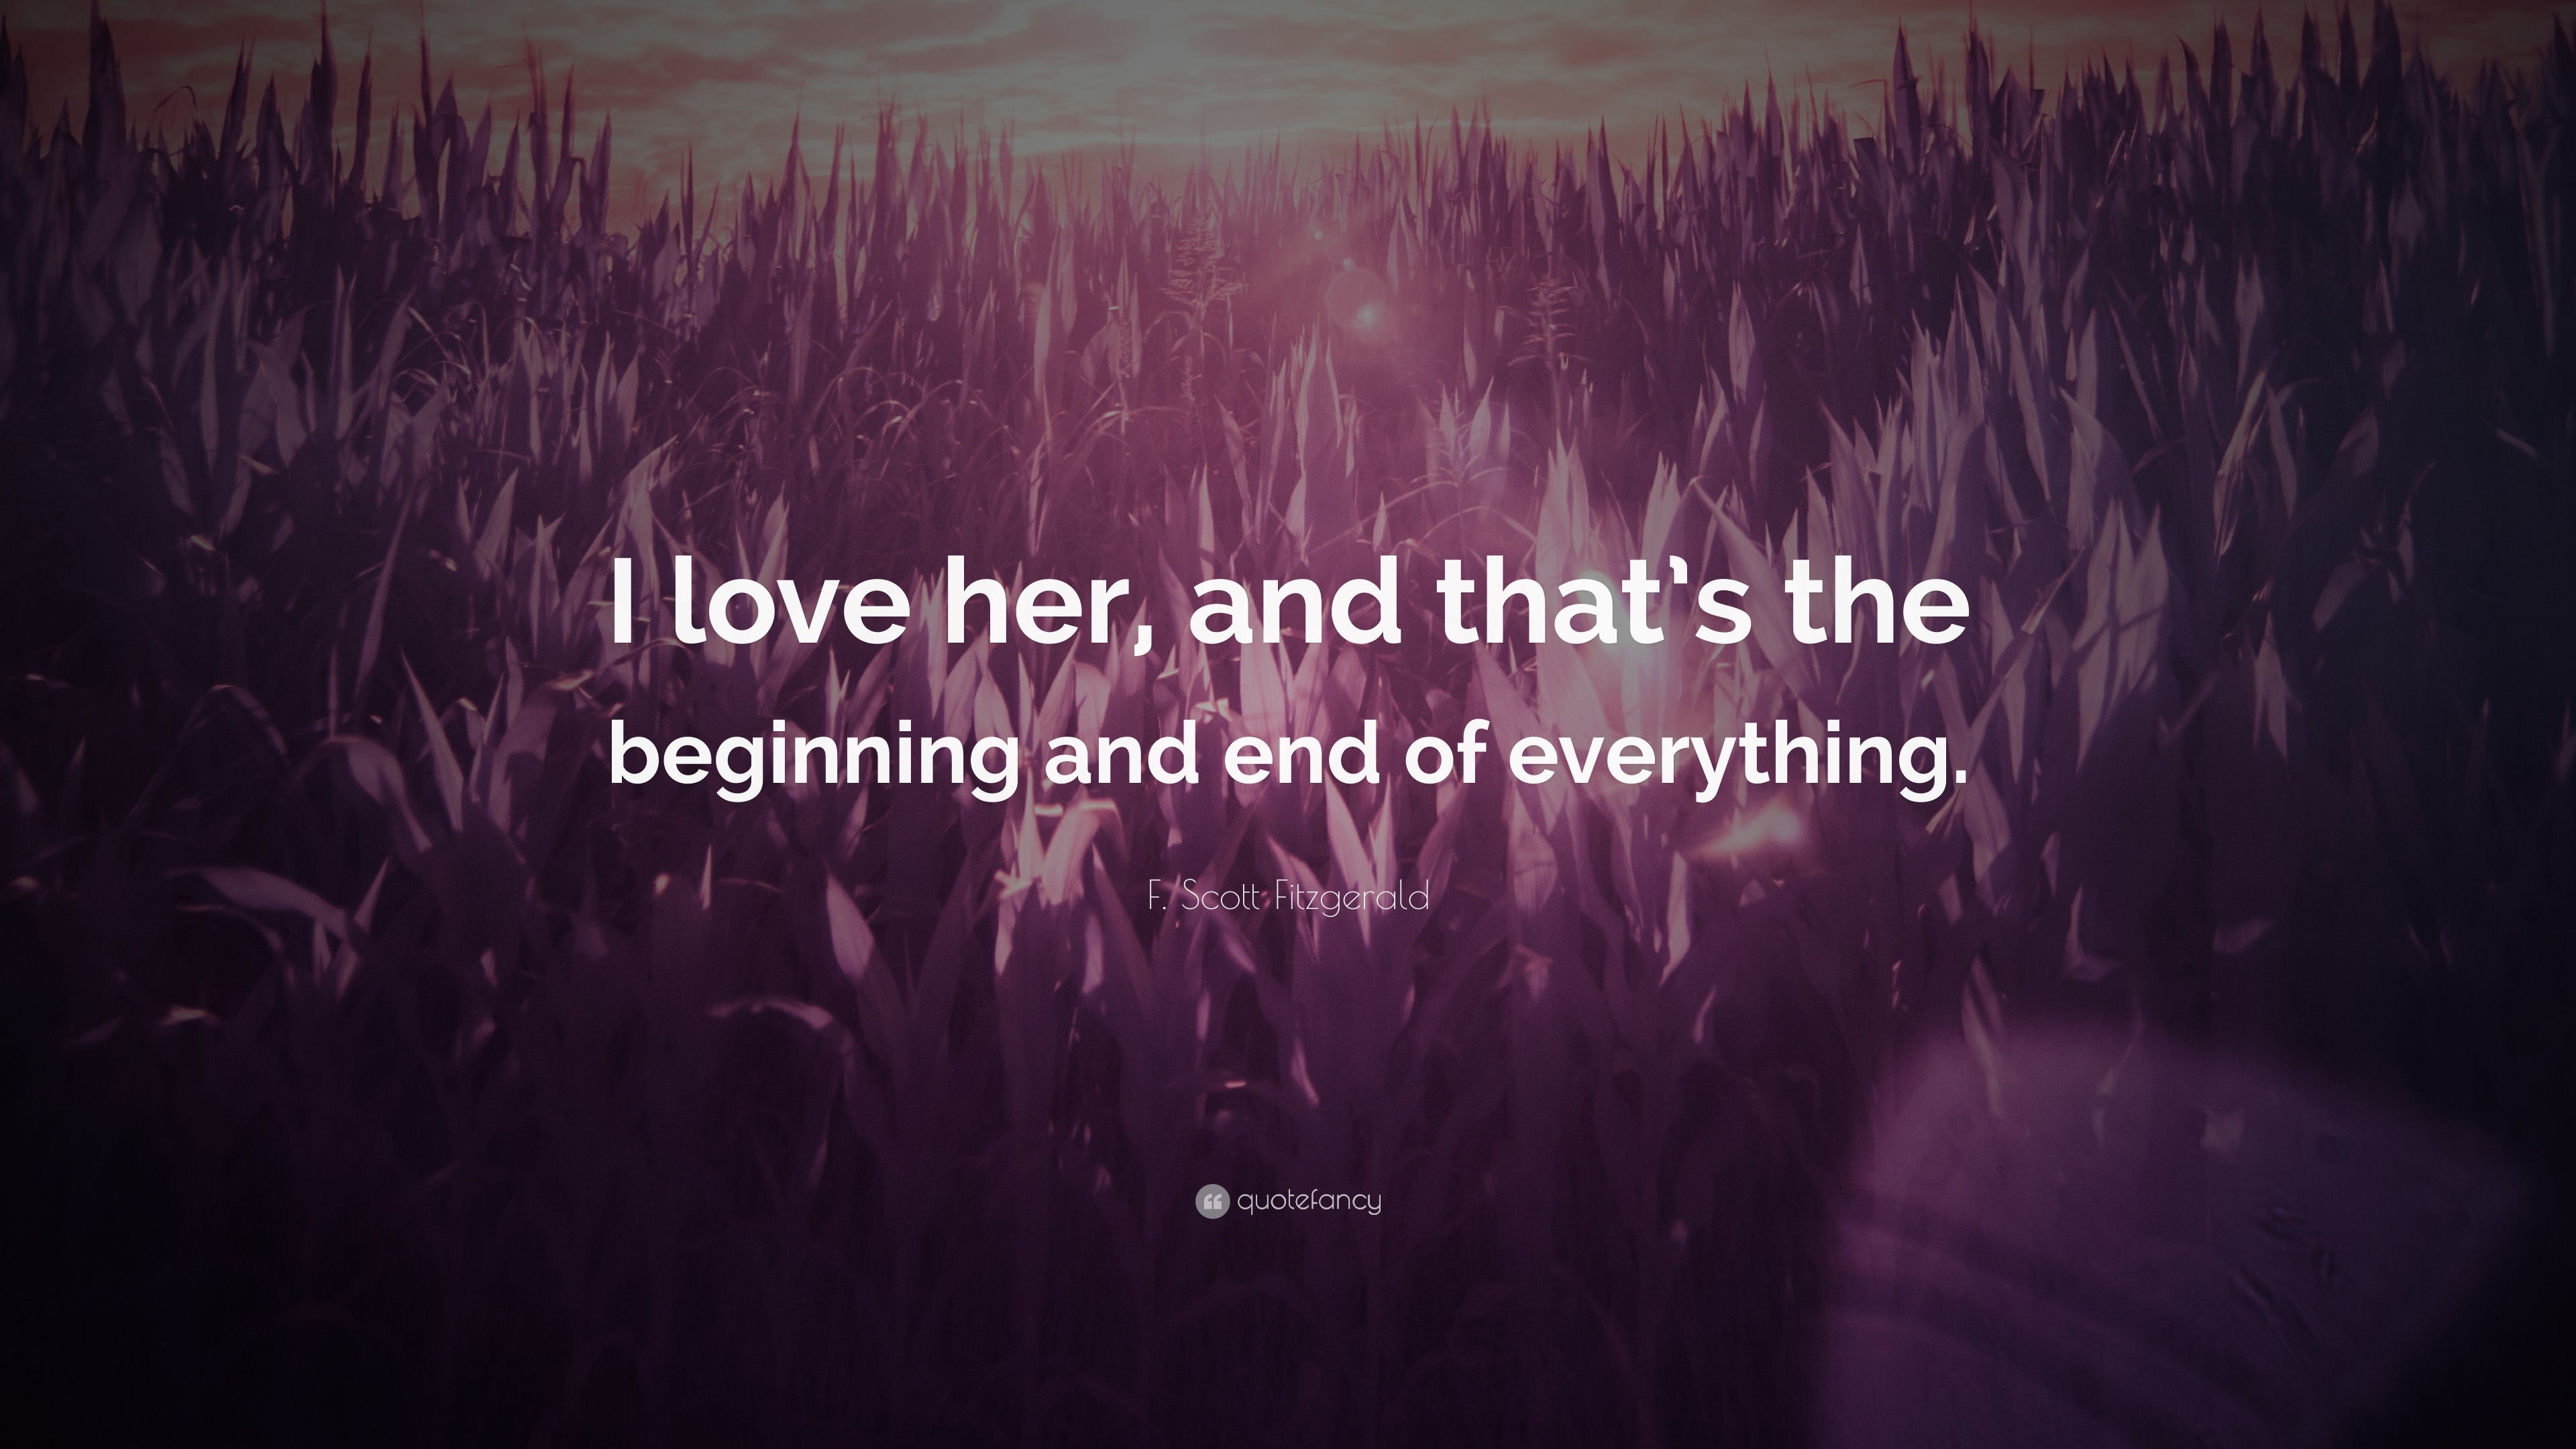 F. Scott Fitzgerald Quote: “I love her, and that’s the beginning and ...